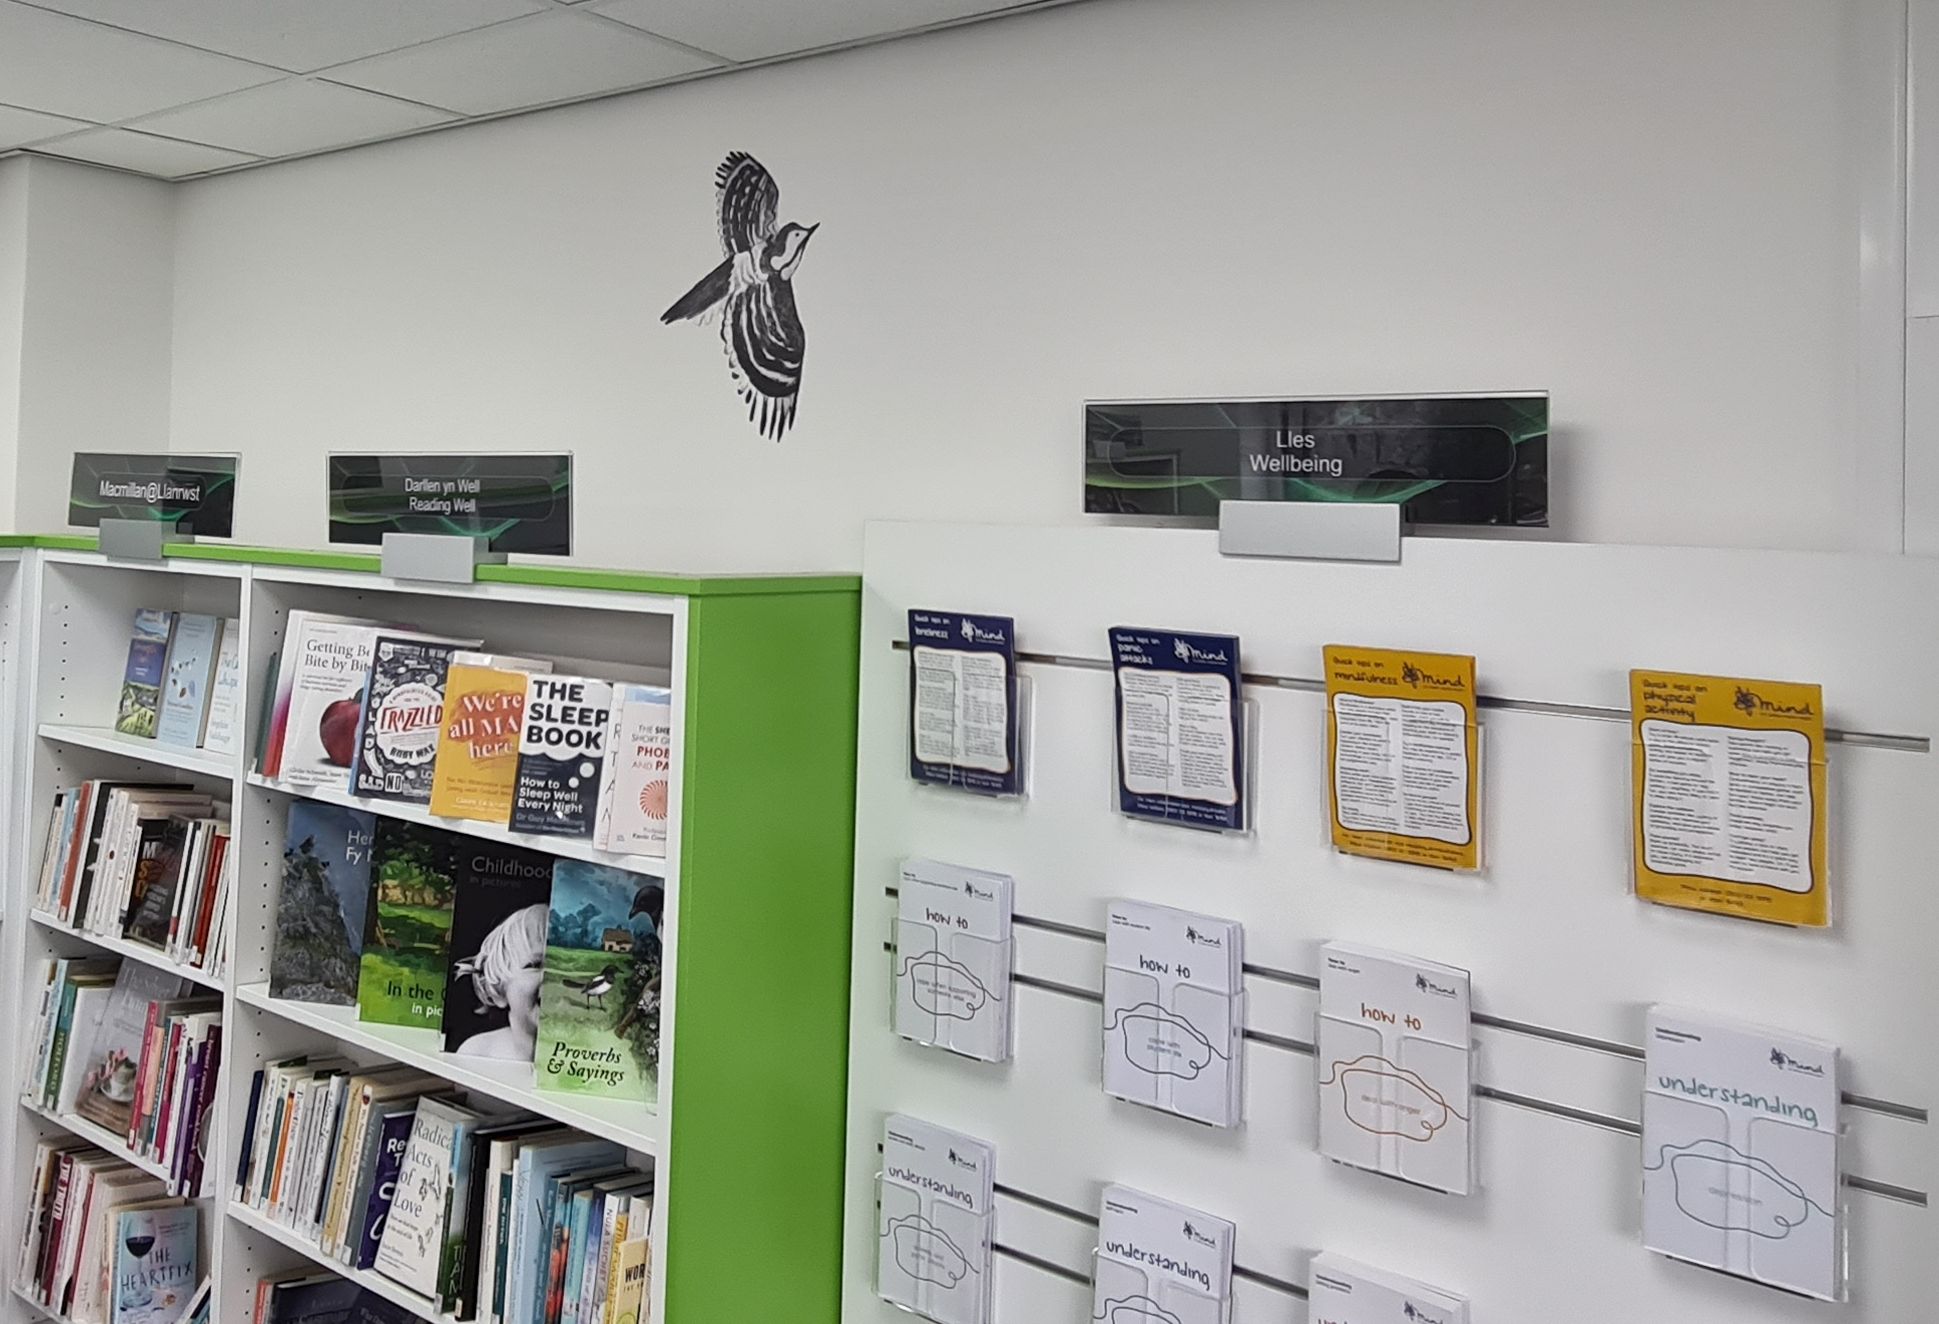 Greater-spotted woodpecker graphic flies above books and leaflets in Wellbeing Hub